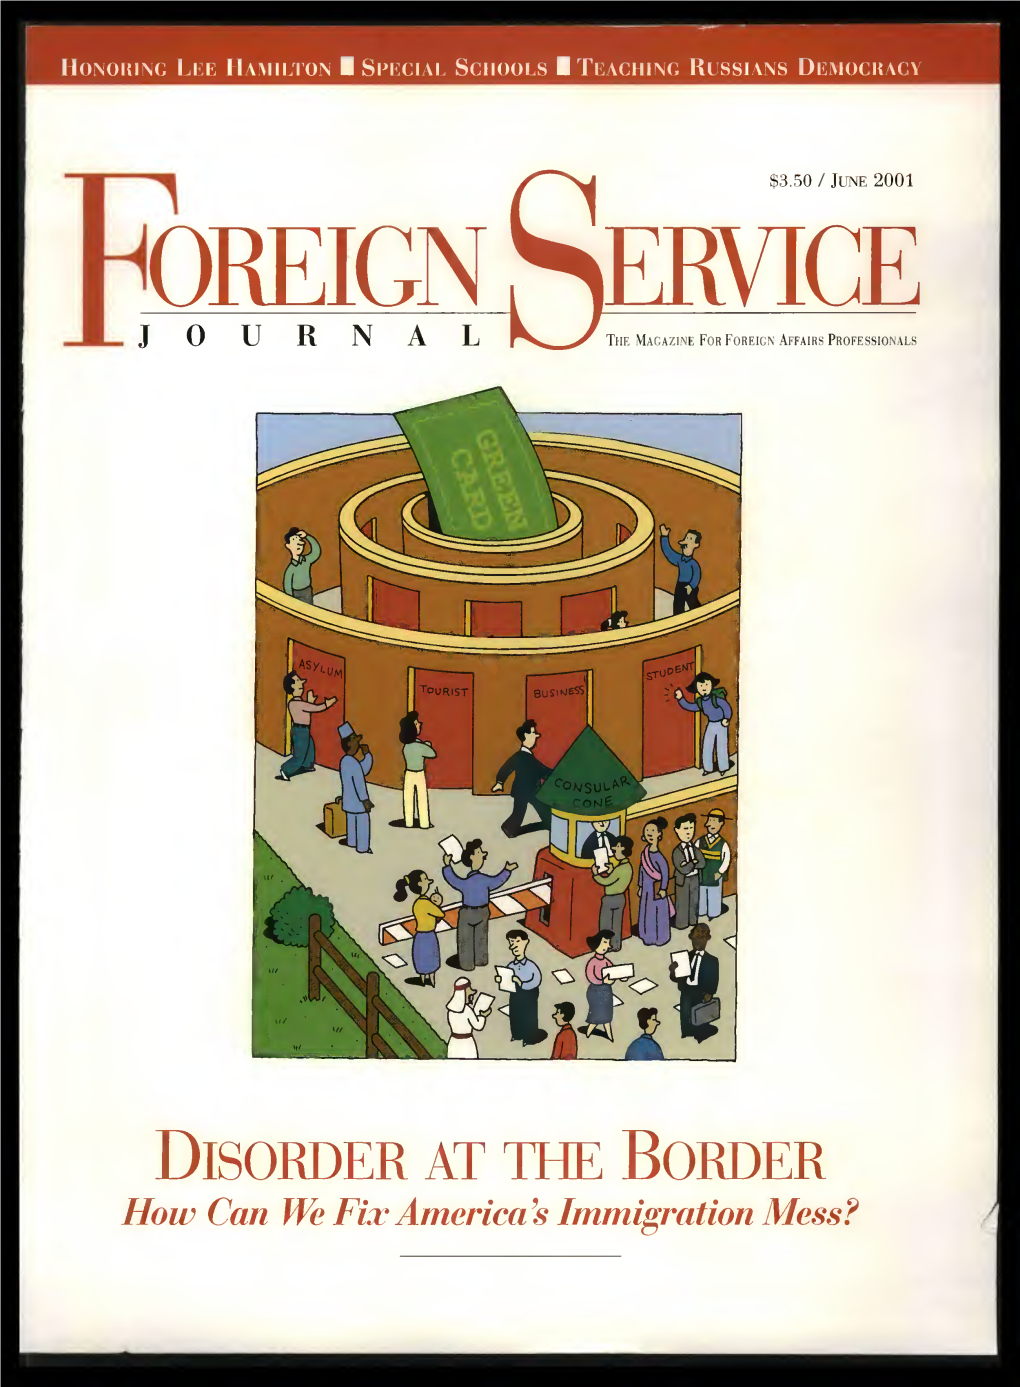 The Foreign Service Journal, June 2001